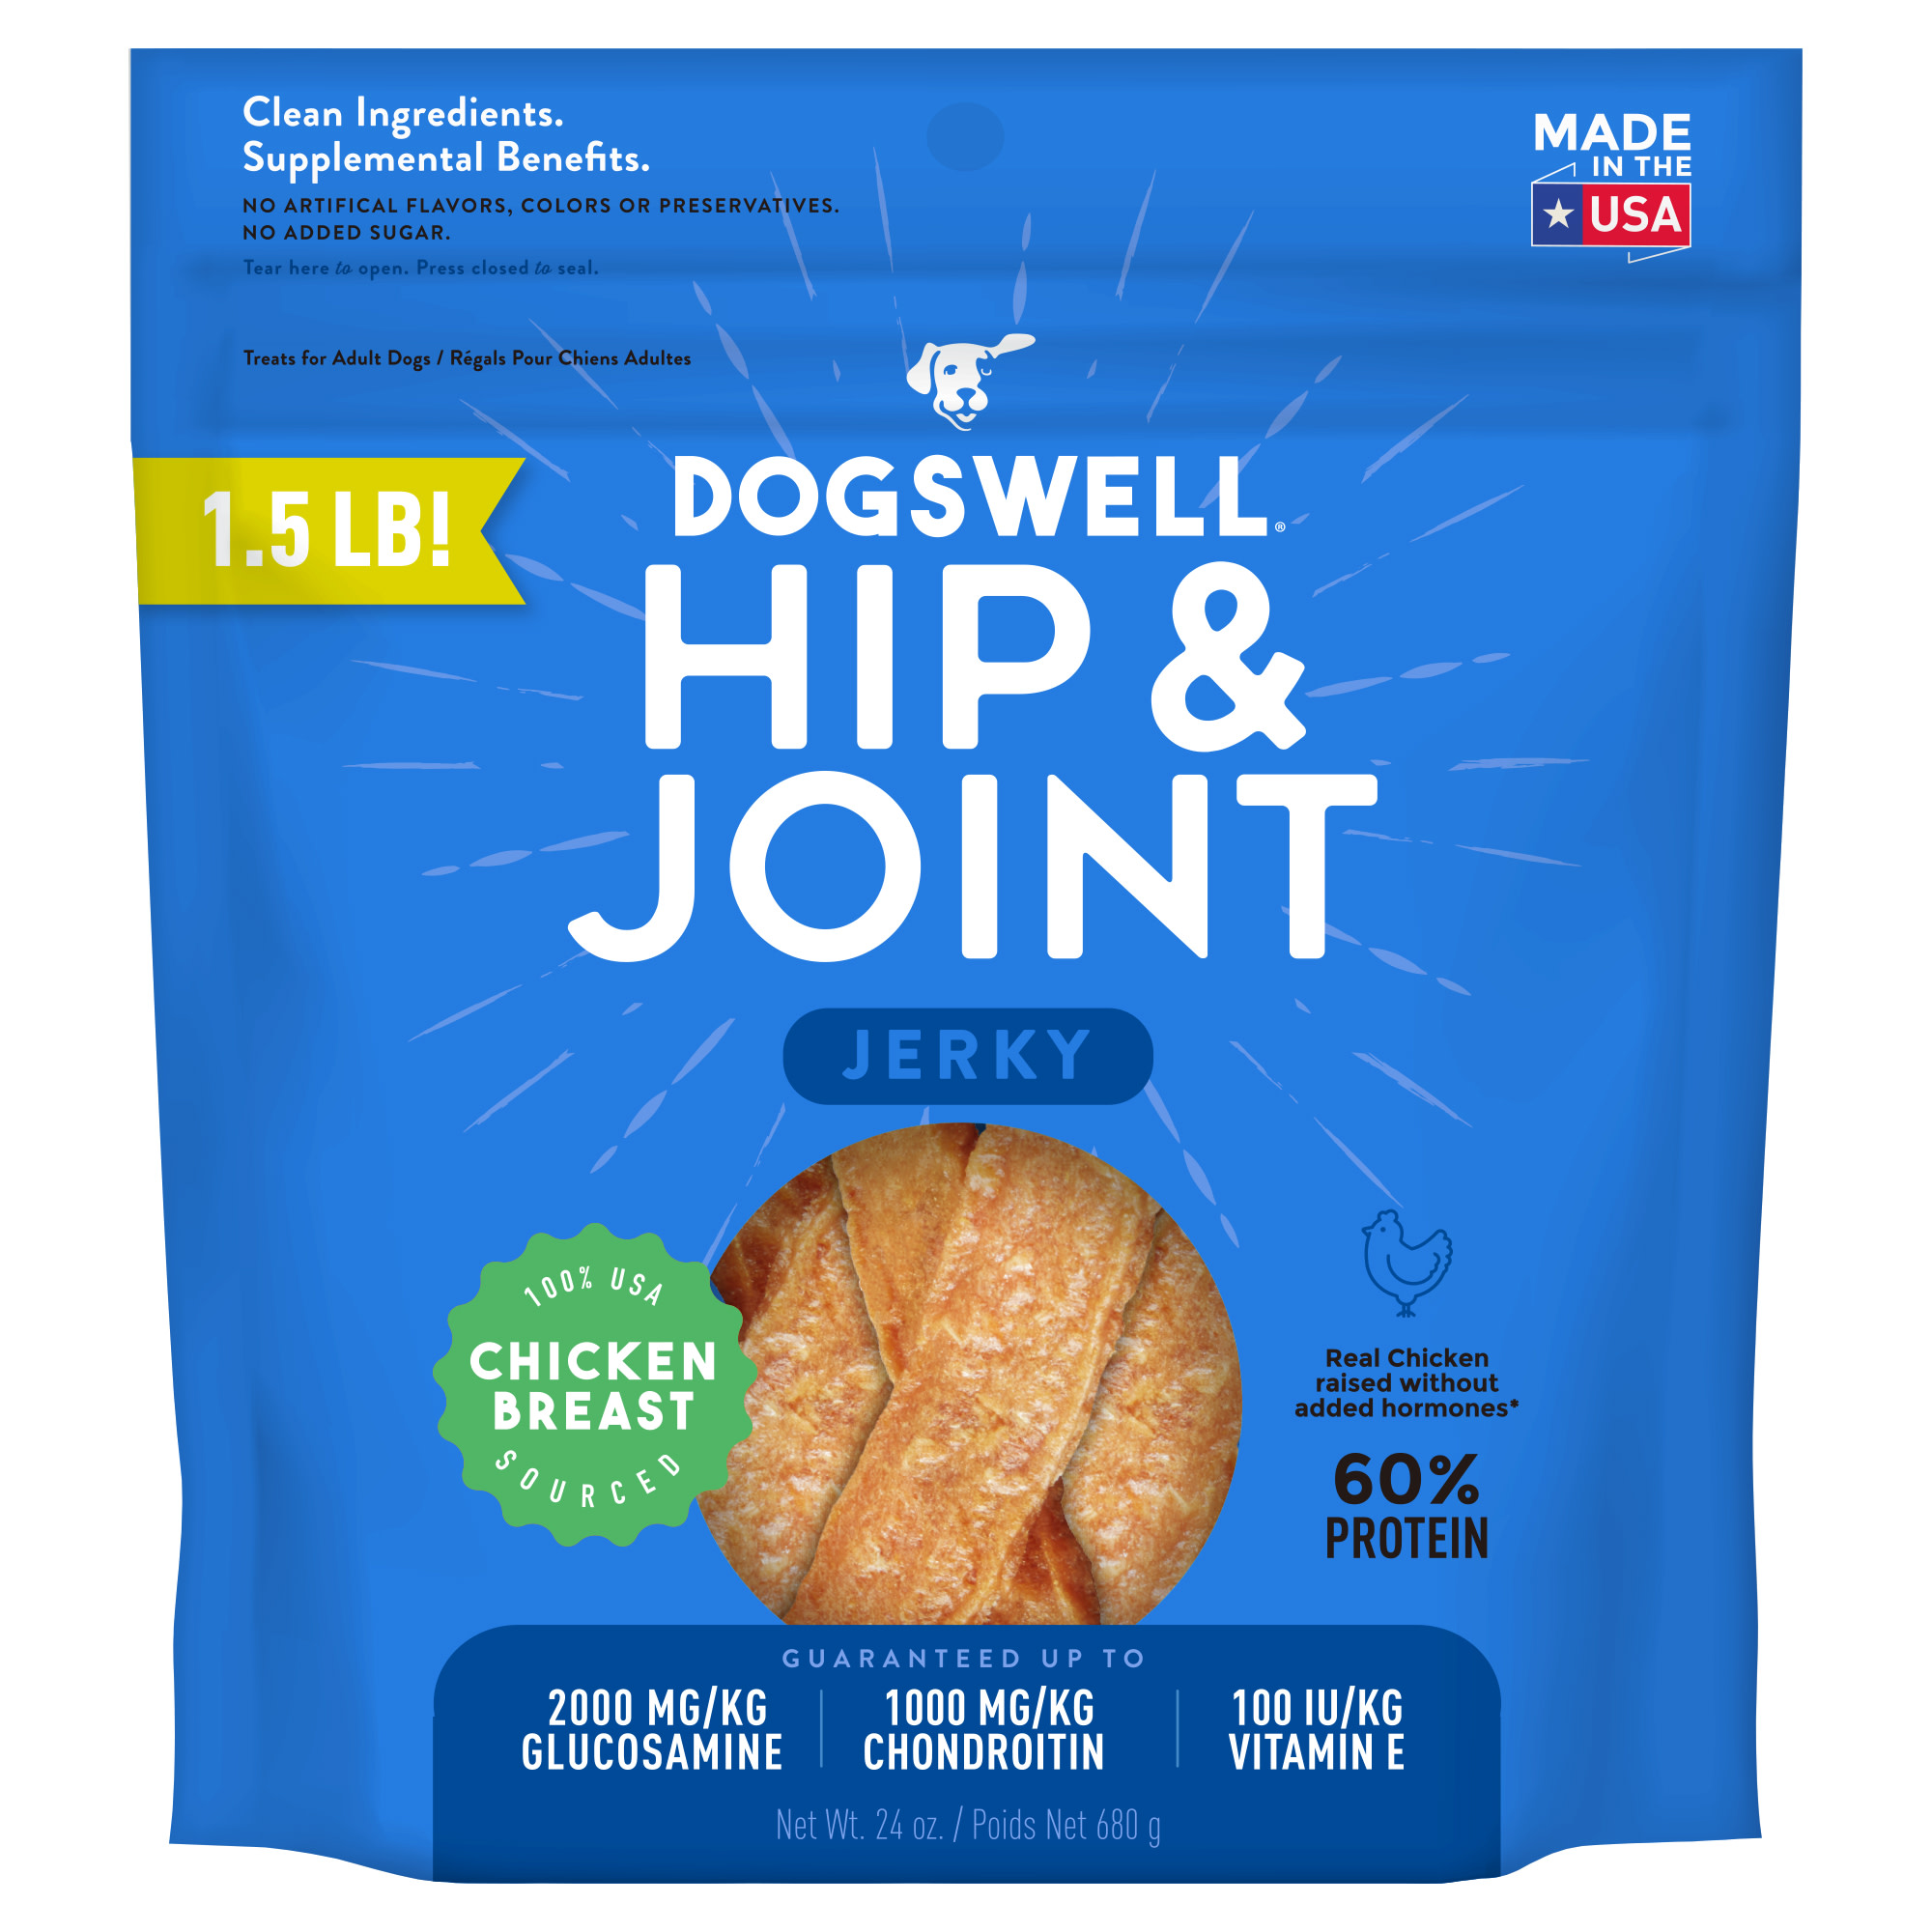 Dogswell Hip & Joint Jerky Grain-Free Chicken Breast for Dogs, 24 oz.